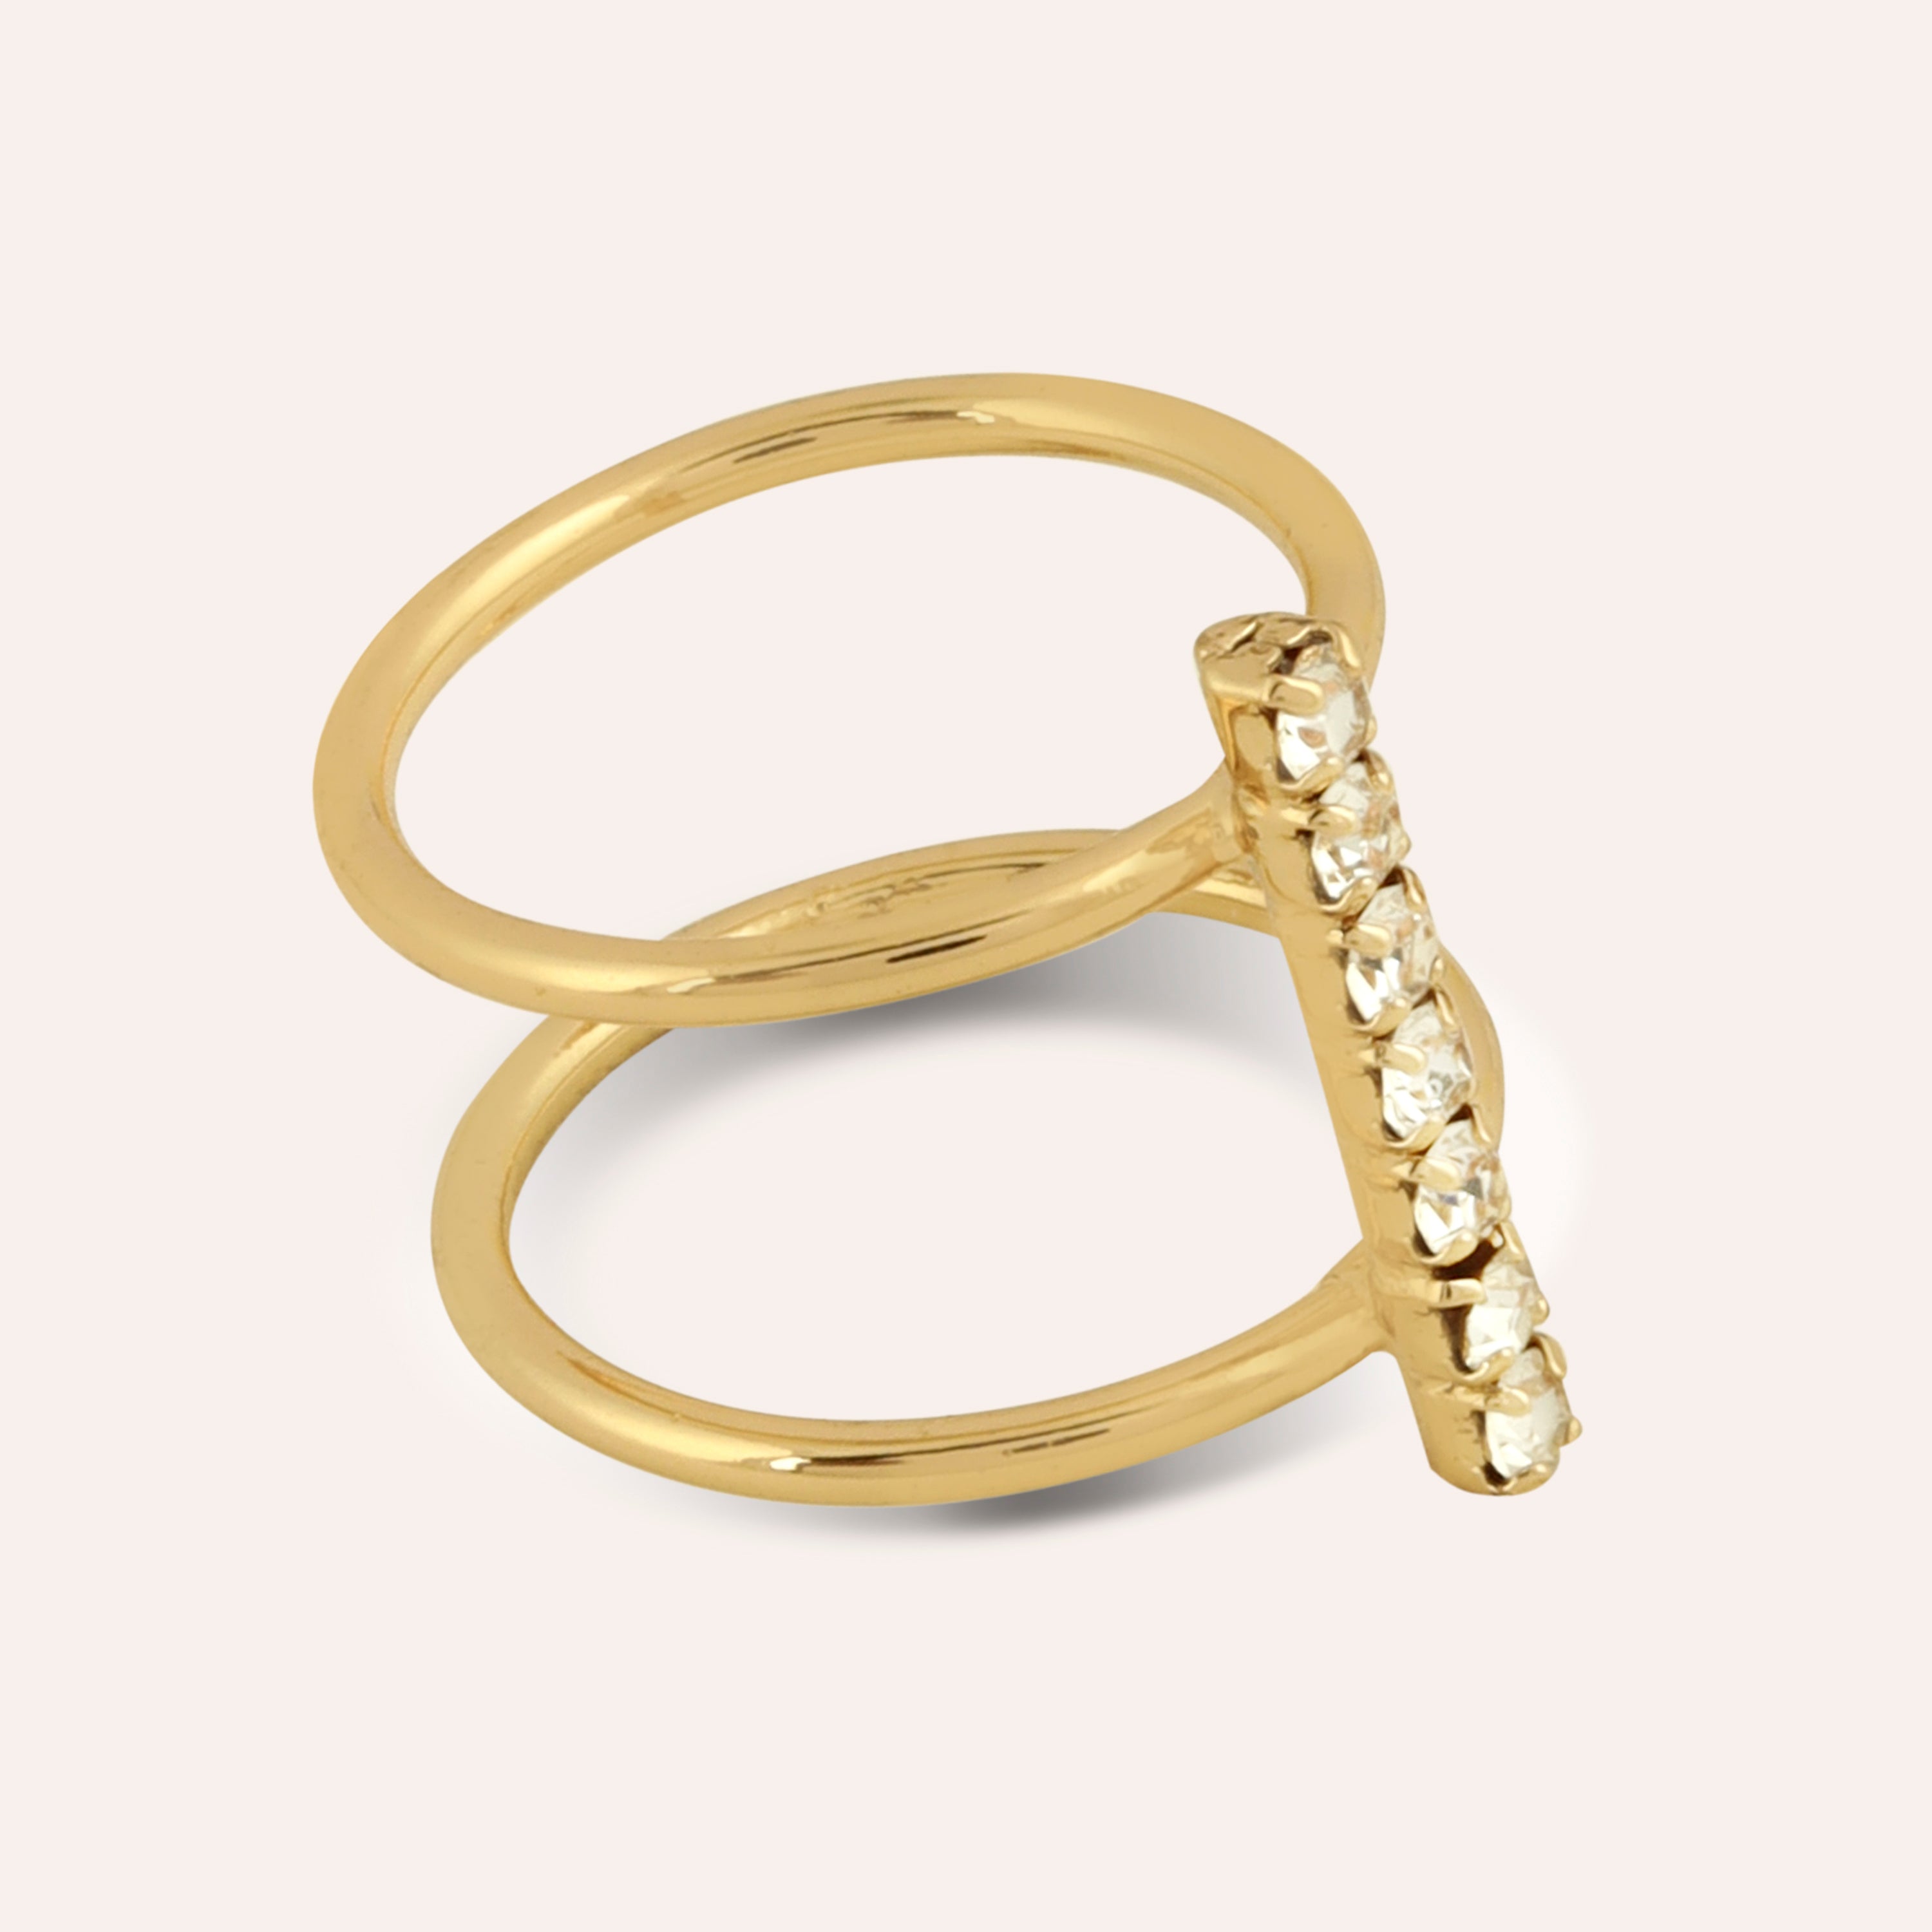 TFC Bloom Bridge Gold Plated Ring- Elevate your style with our exquisite collection of gold-plated adjustable rings for women, including timeless signet rings. Explore cheapest fashion jewellery designs with anti-tarnish properties, all at The Fun Company with a touch of elegance